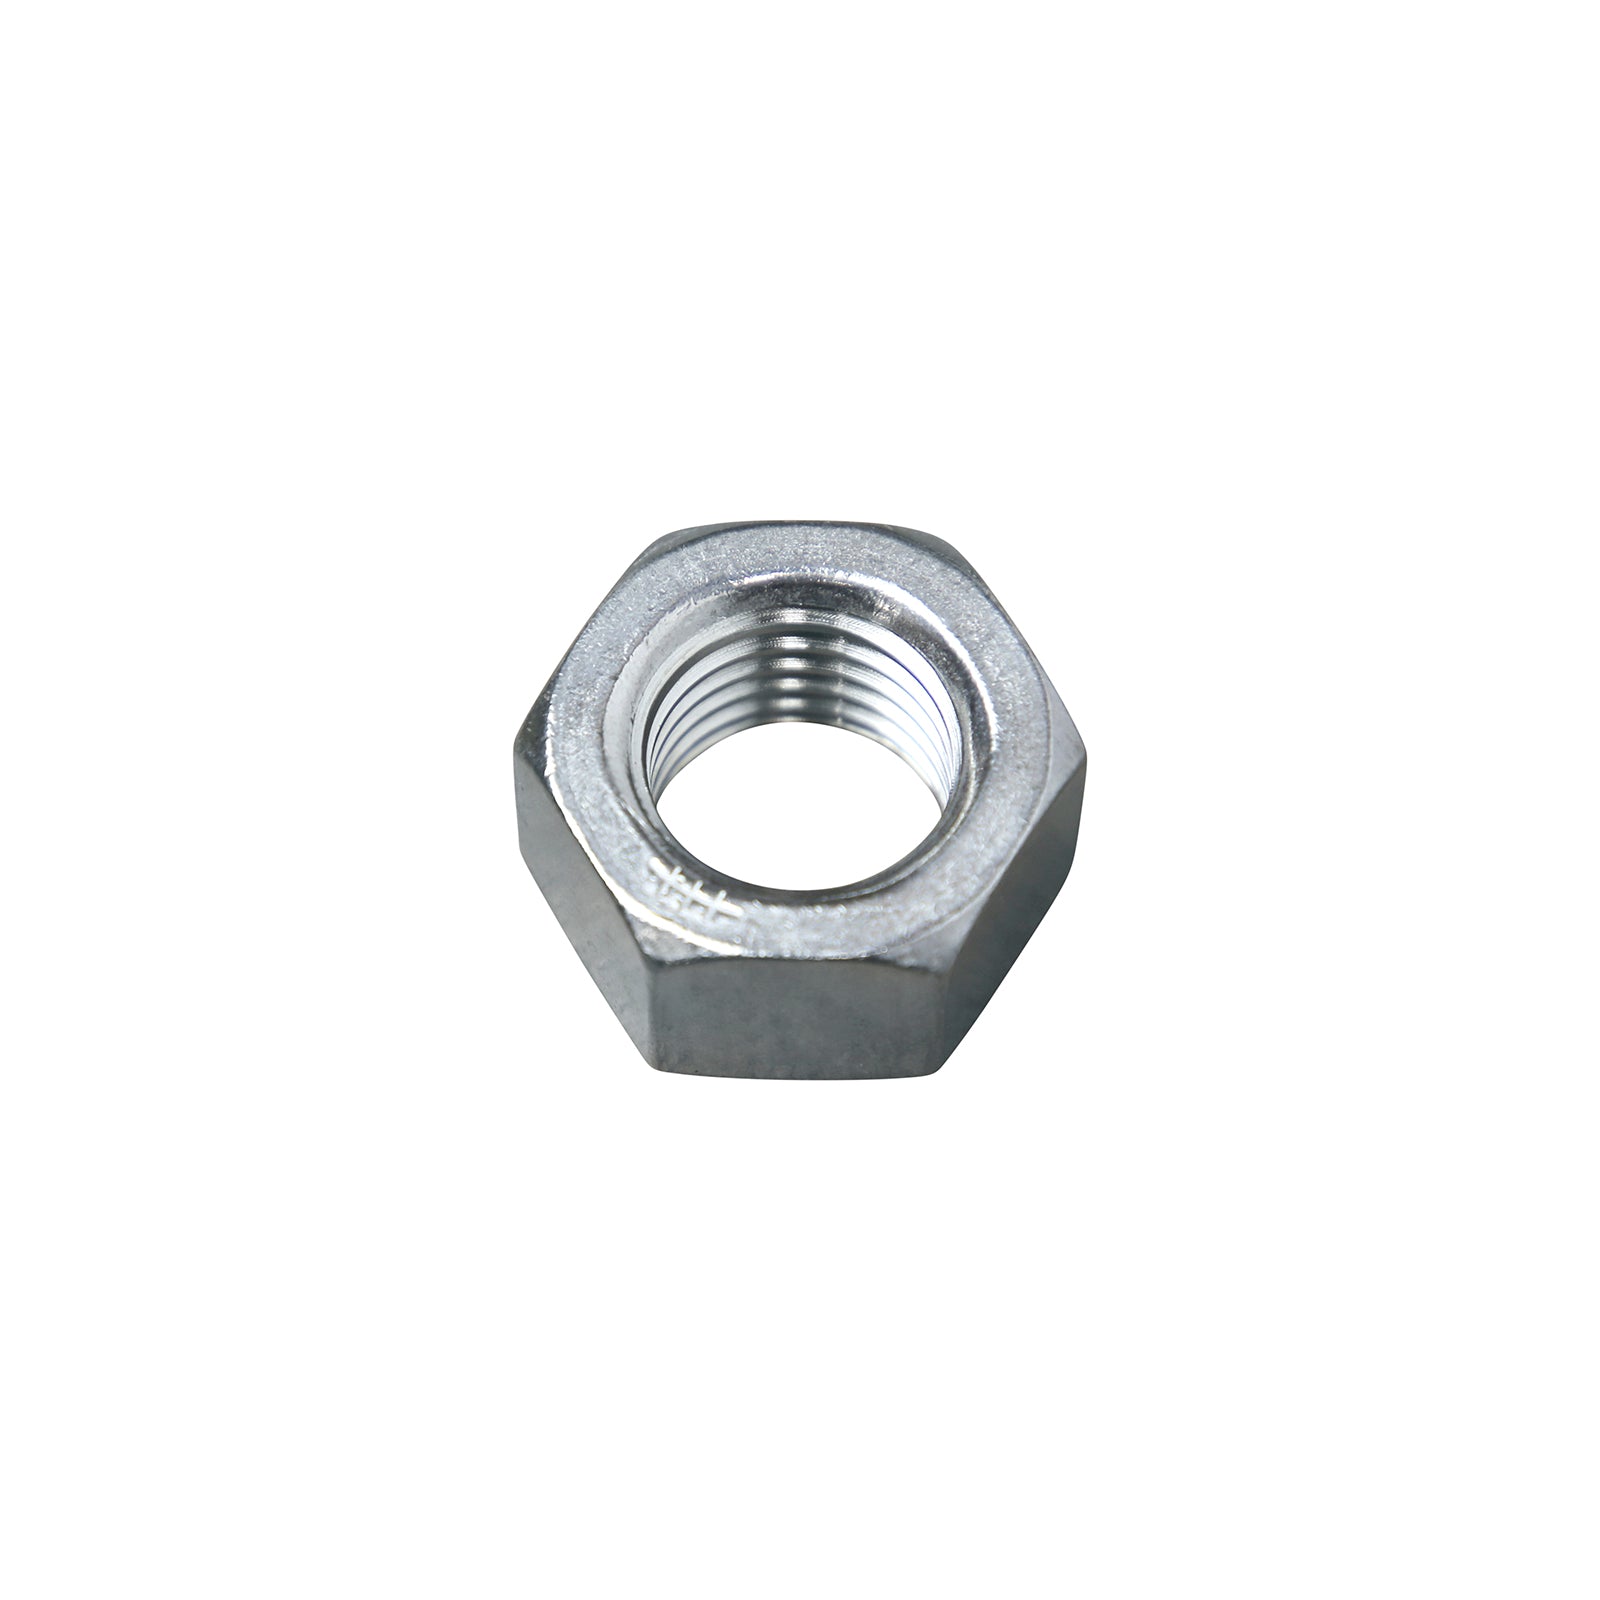 7/8"-9 Conquest Hex Nut - 304 Stainless Steel